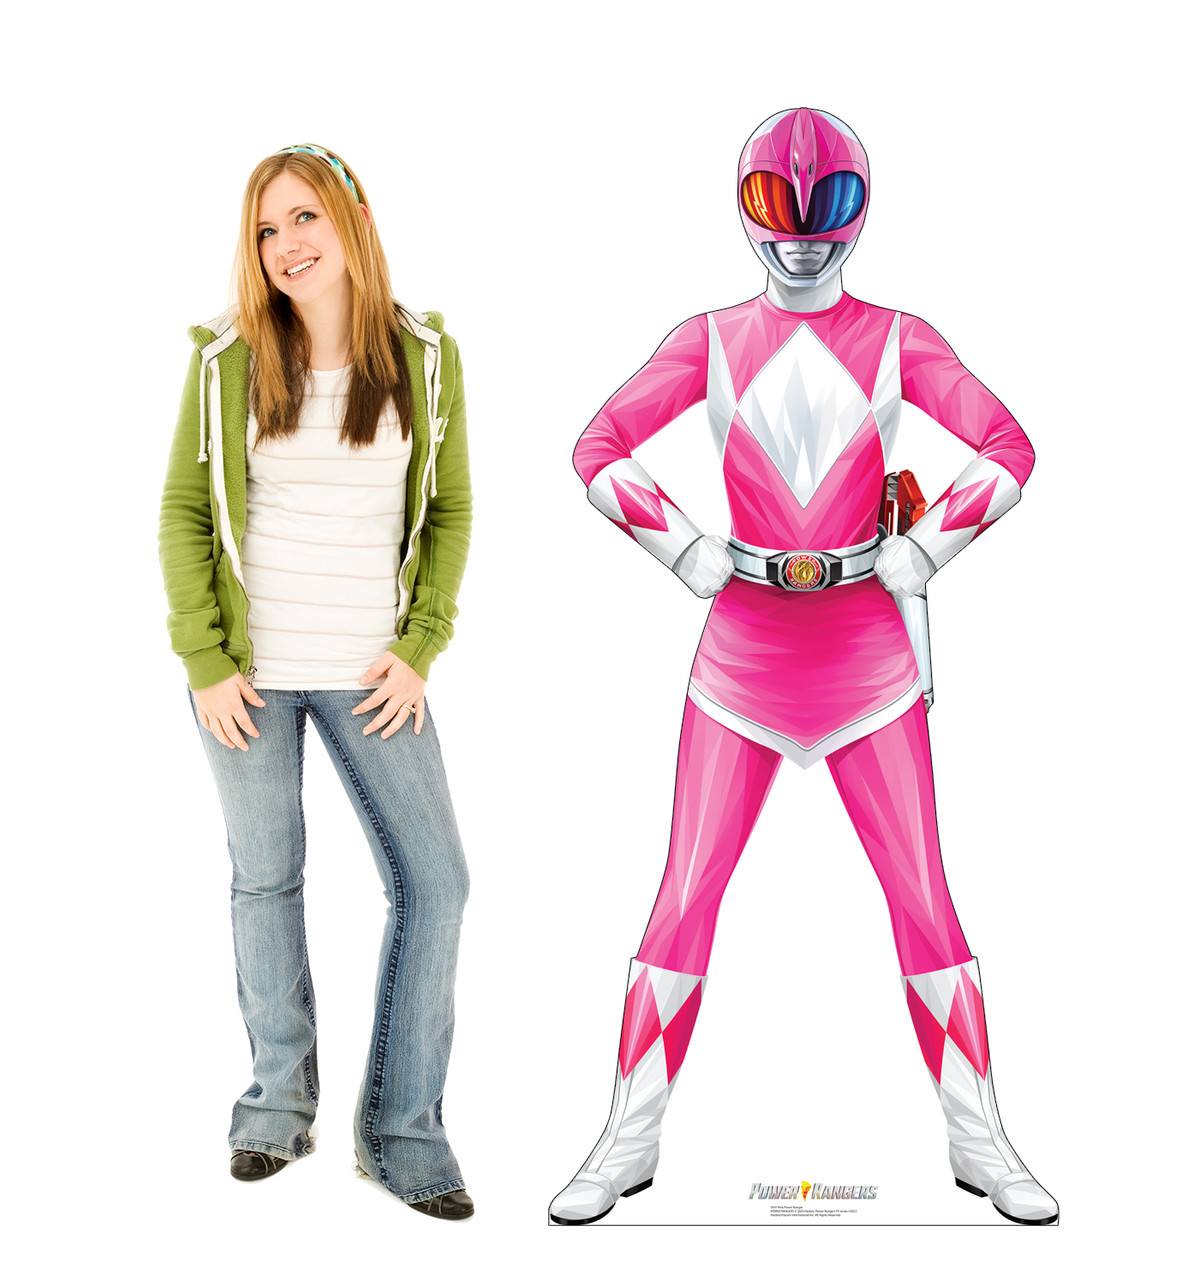 Life-size cardboard standee of Pink Power Ranger with model.